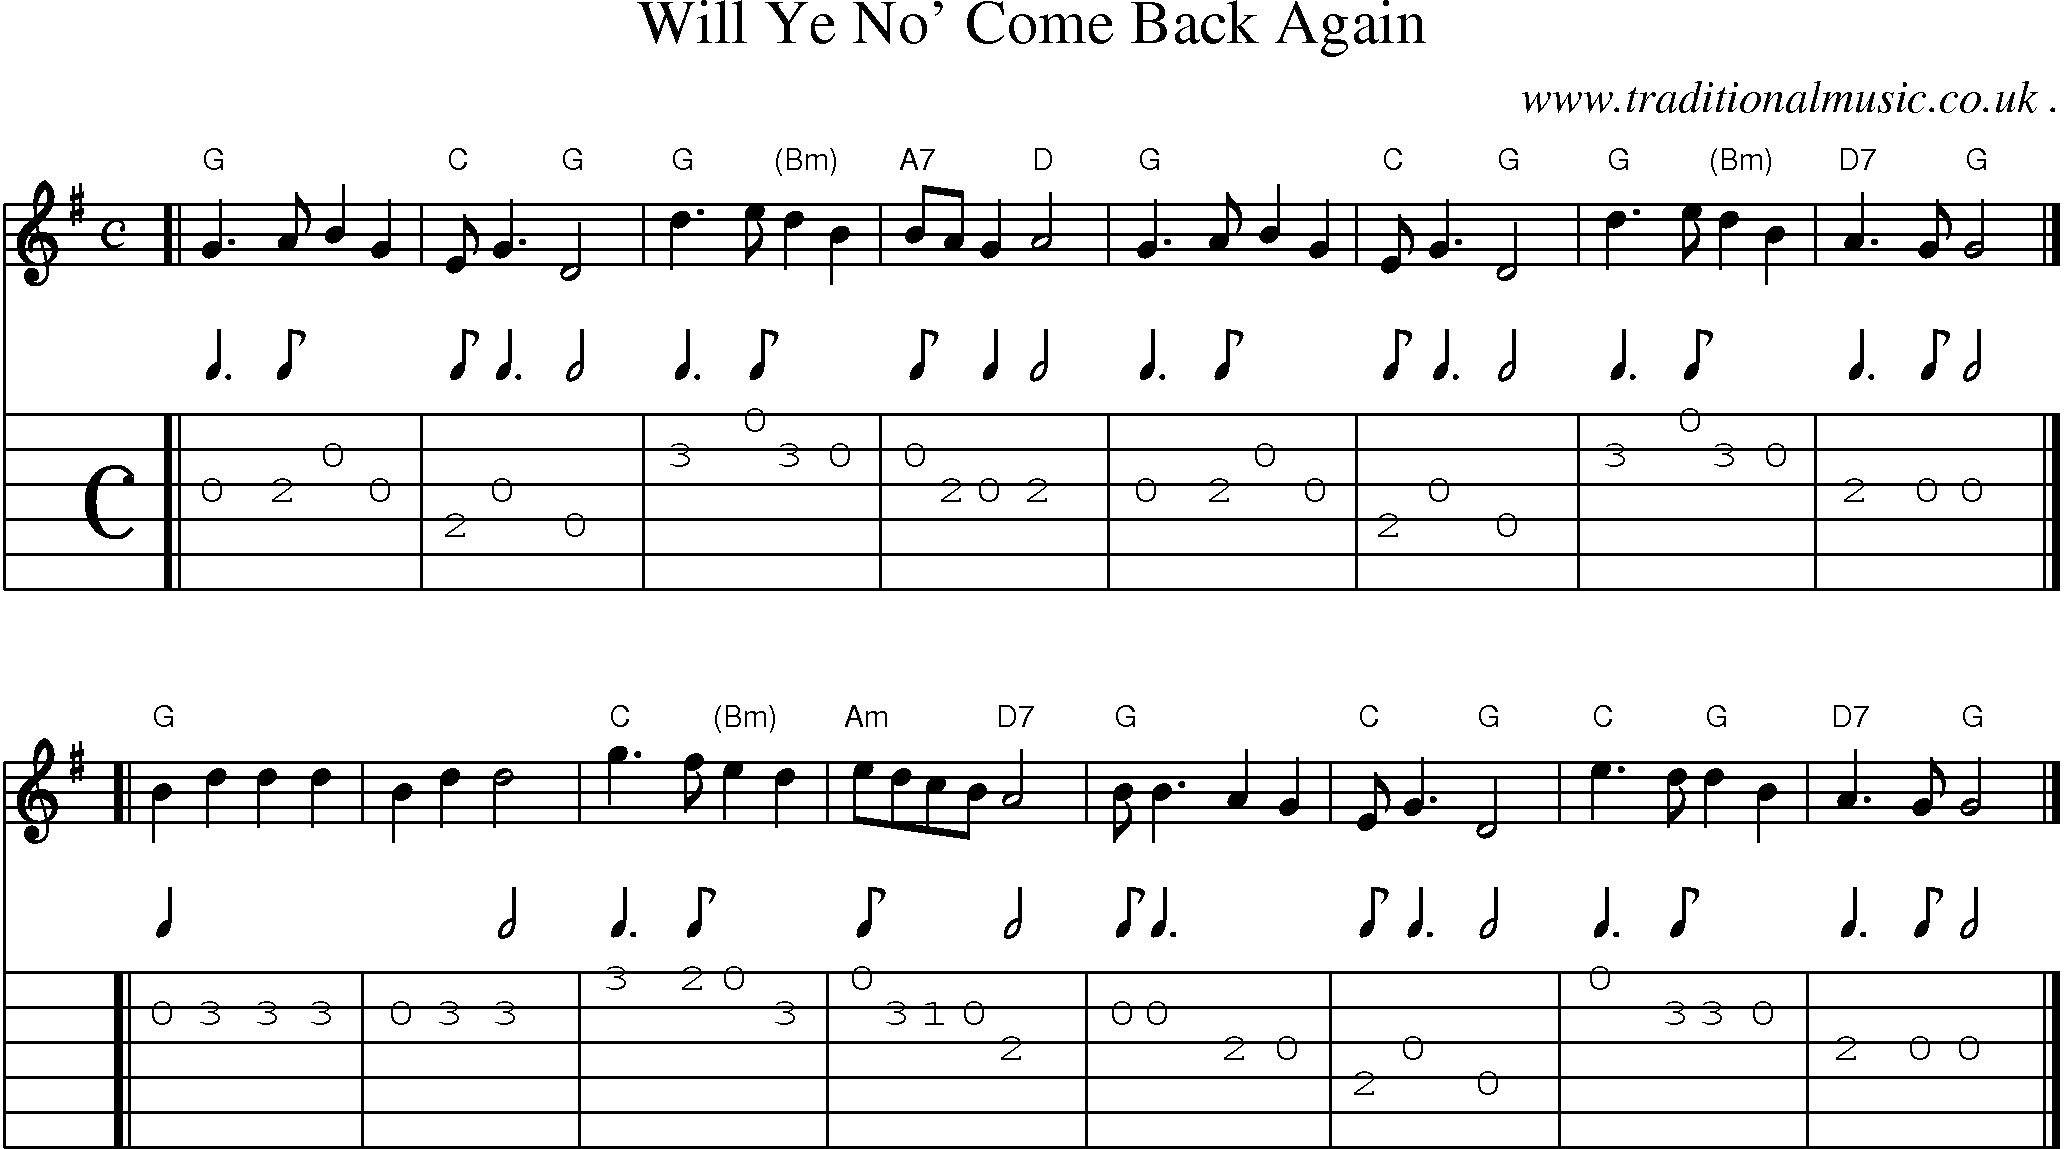 Sheet-music  score, Chords and Guitar Tabs for Will Ye No Come Back Again